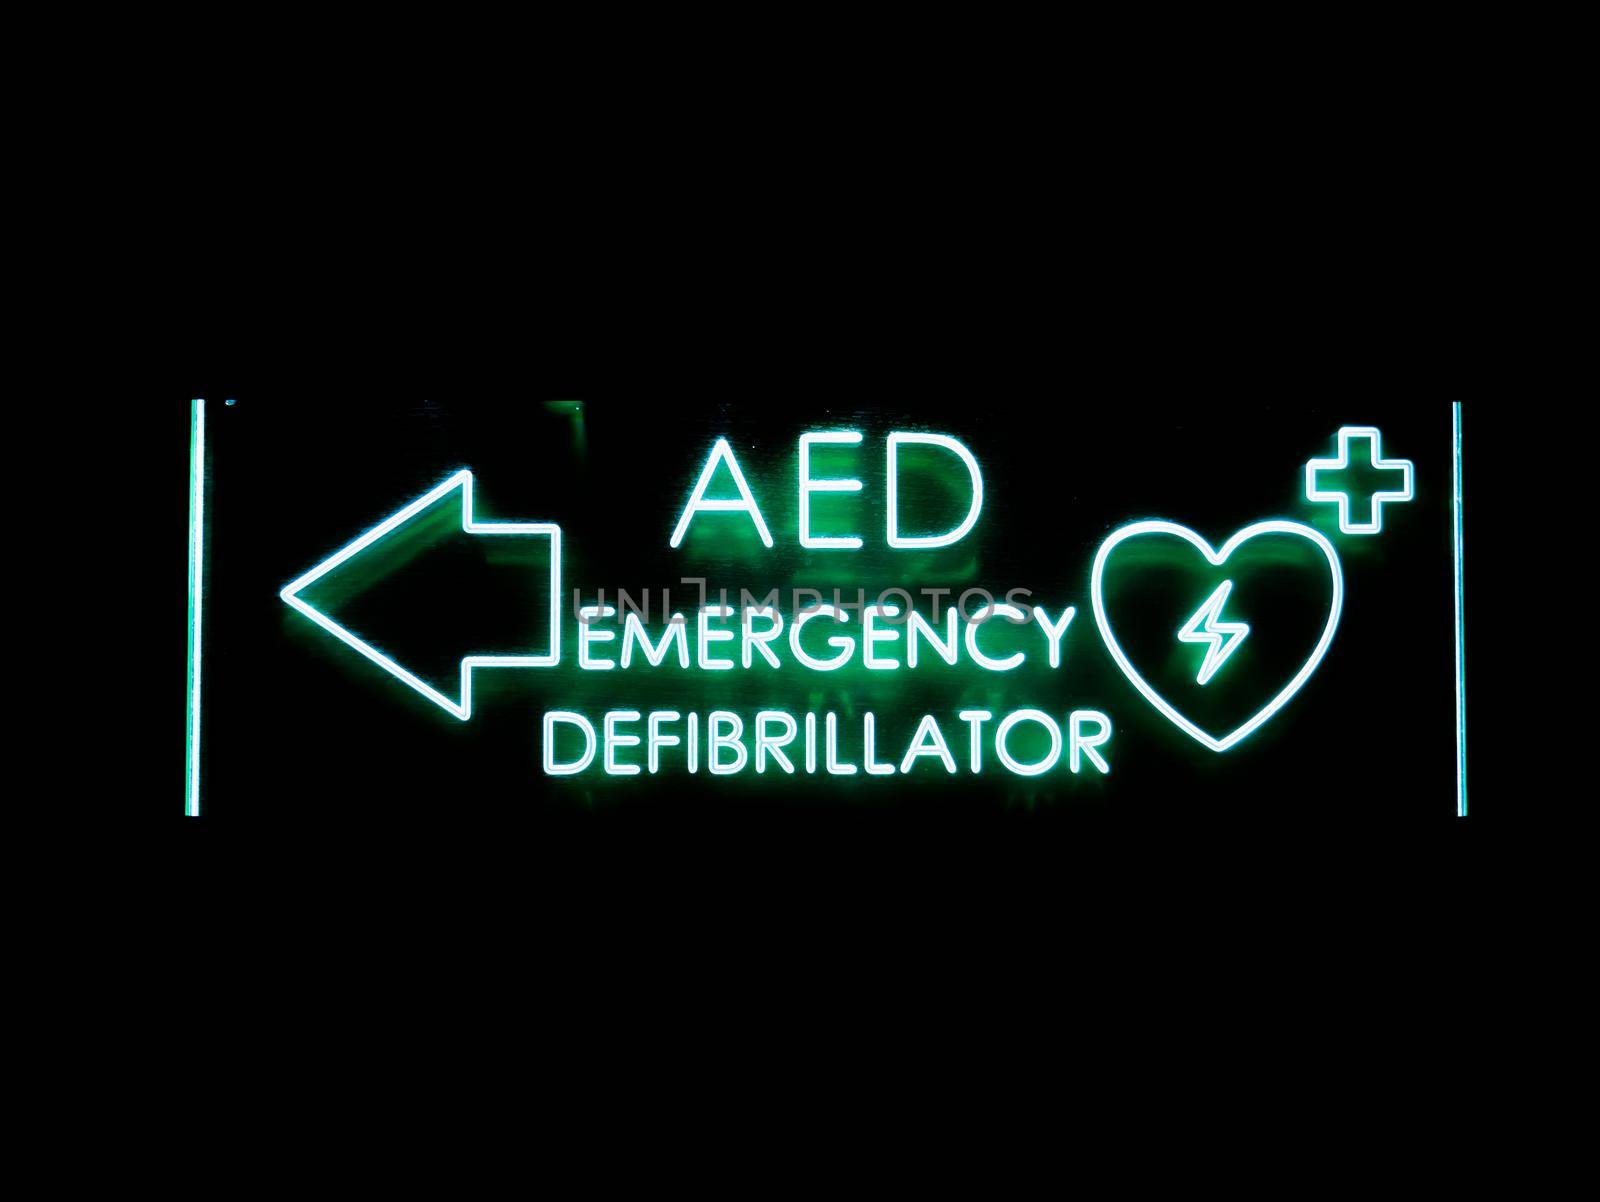 Emergency defibrillator DEA or AED sign lighted by harukoro